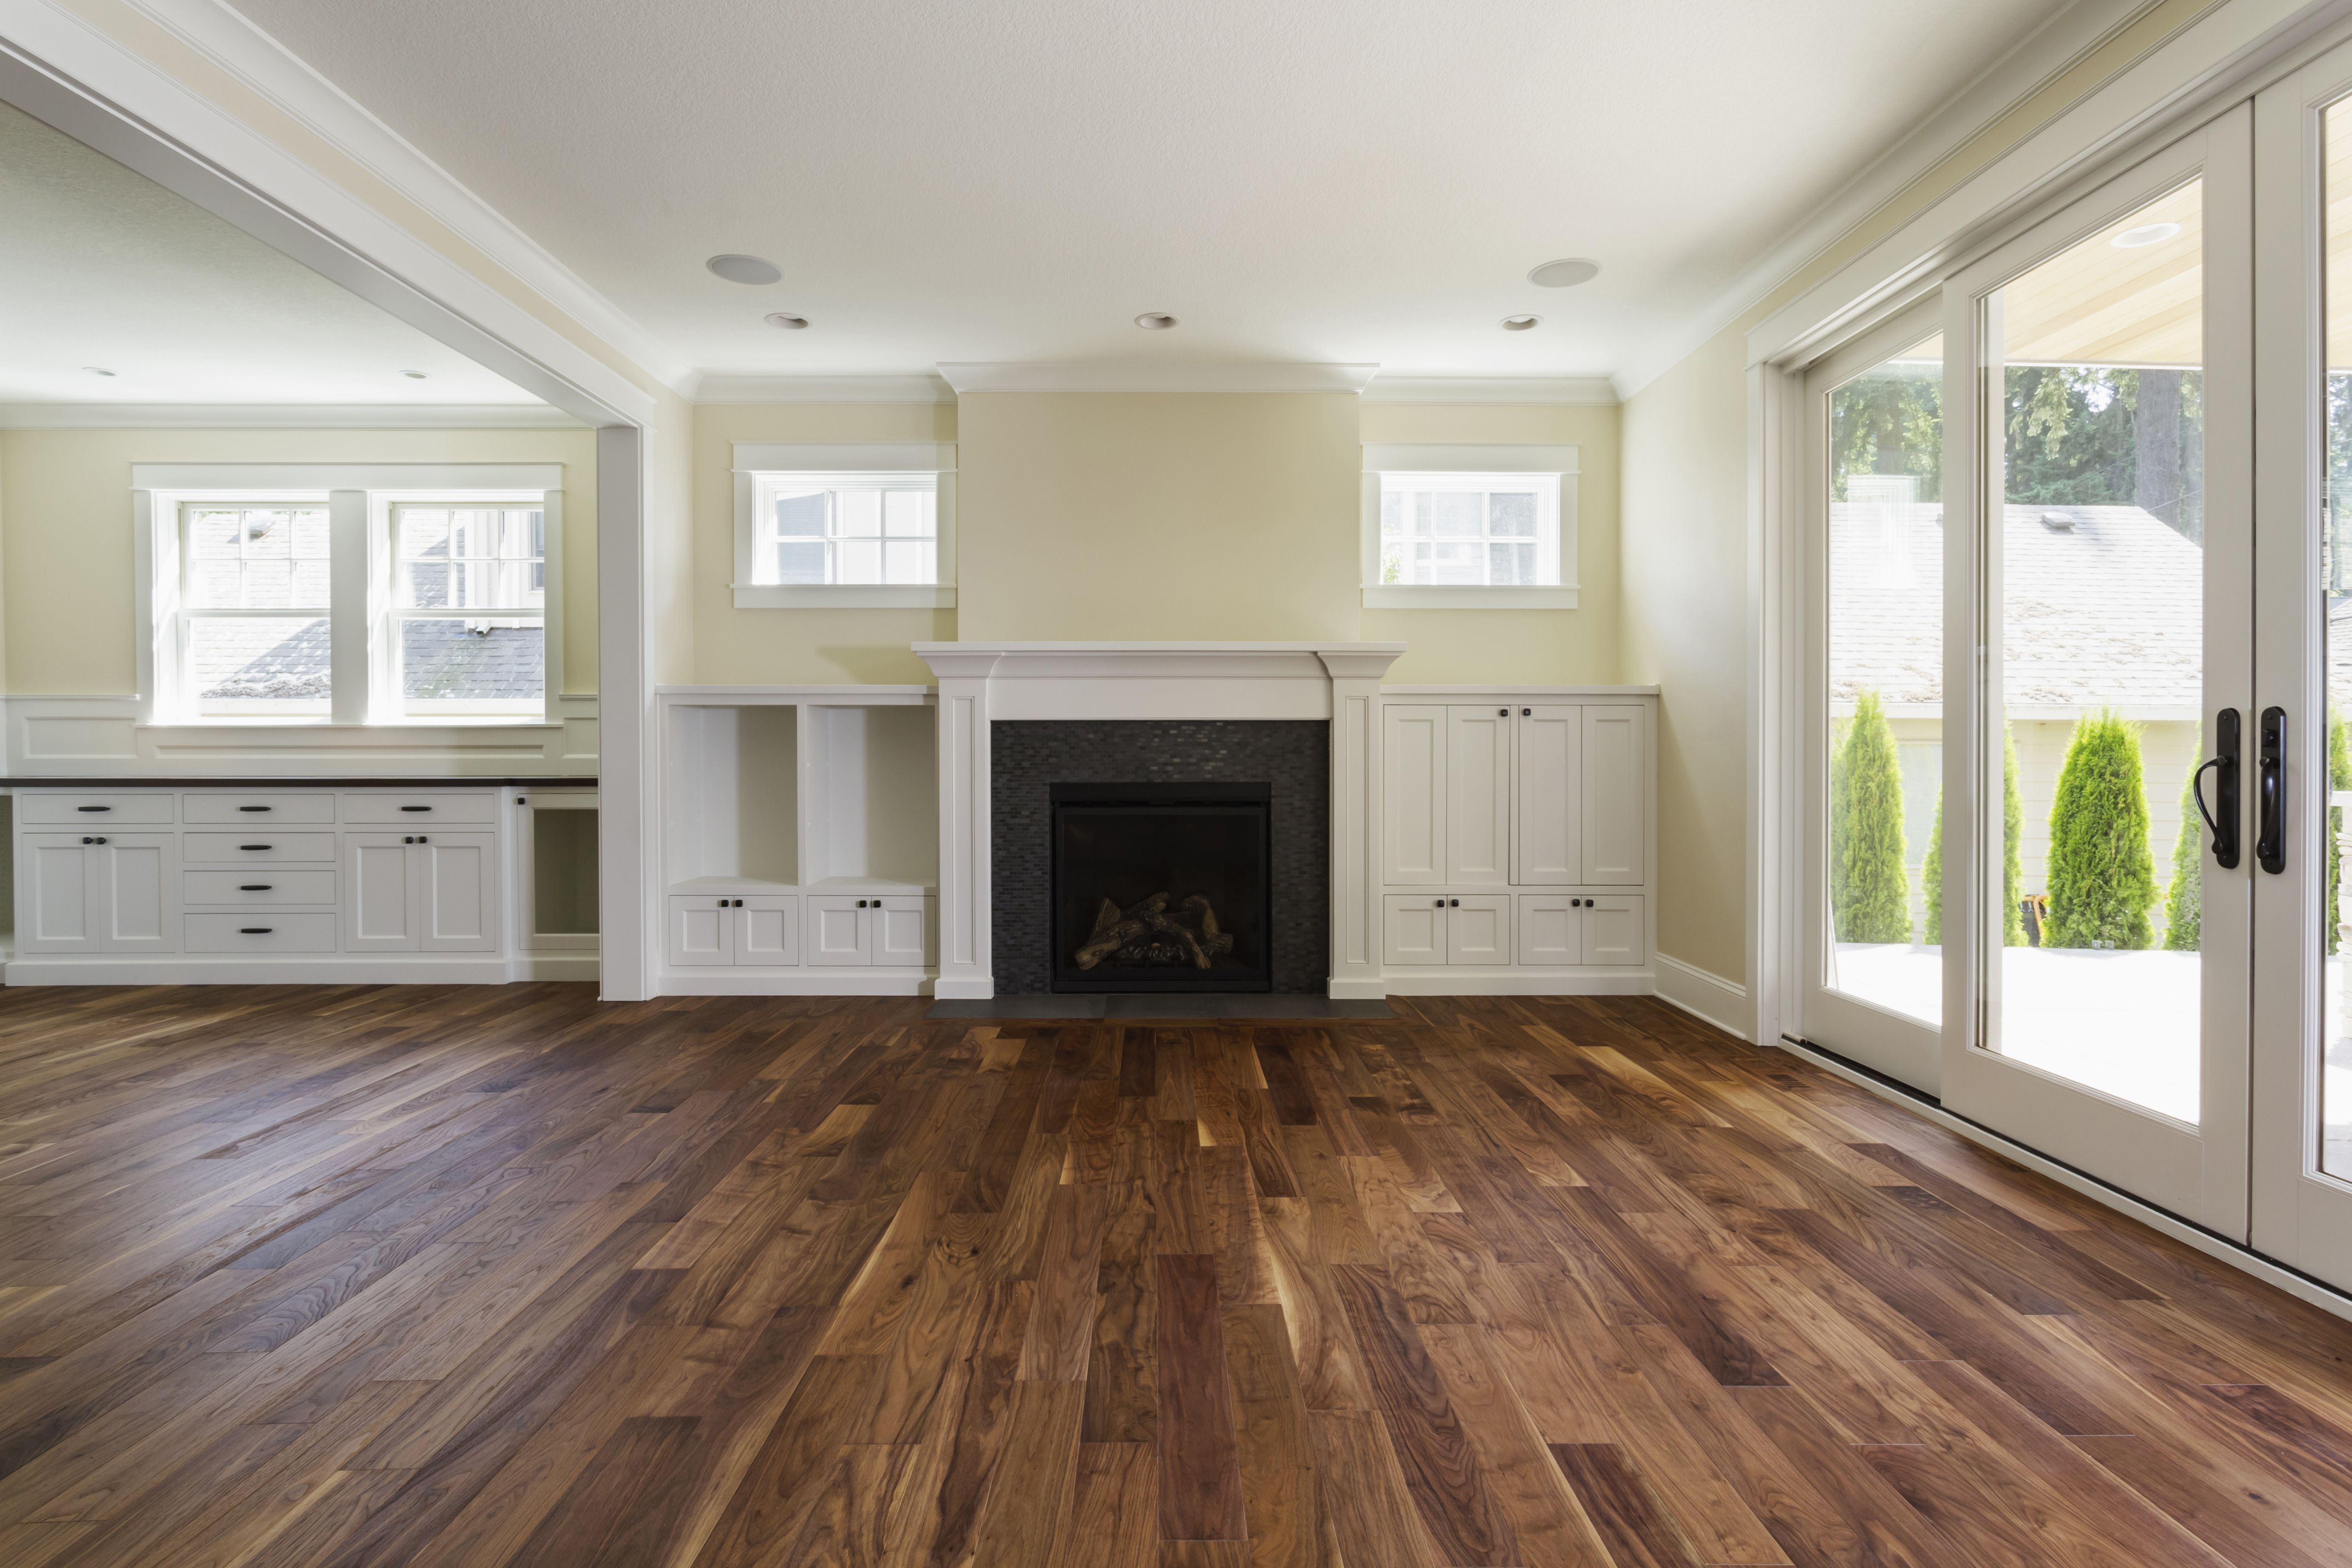 16 Amazing Manufactured Hardwood Floor Cleaner 2024 free download manufactured hardwood floor cleaner of the pros and cons of prefinished hardwood flooring inside fireplace and built in shelves in living room 482143011 57bef8e33df78cc16e035397